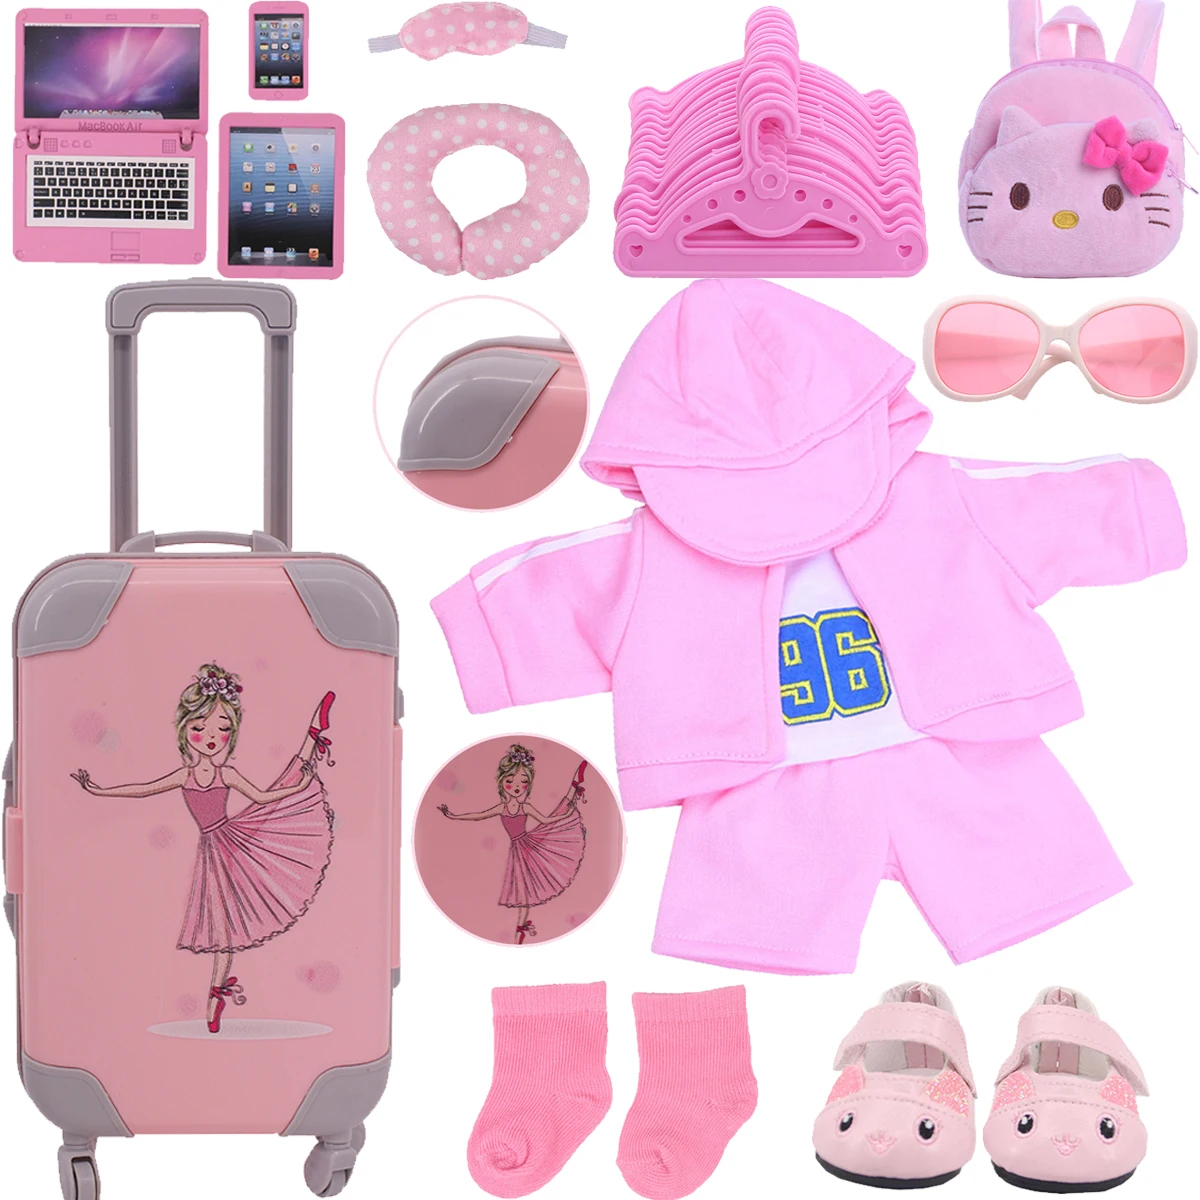 

Reborn New Pink Doll Clothes Shoes Suitcase Set For 18Inch American Doll&43CM Born Baby Generation Russian Girl's Christmas Gift